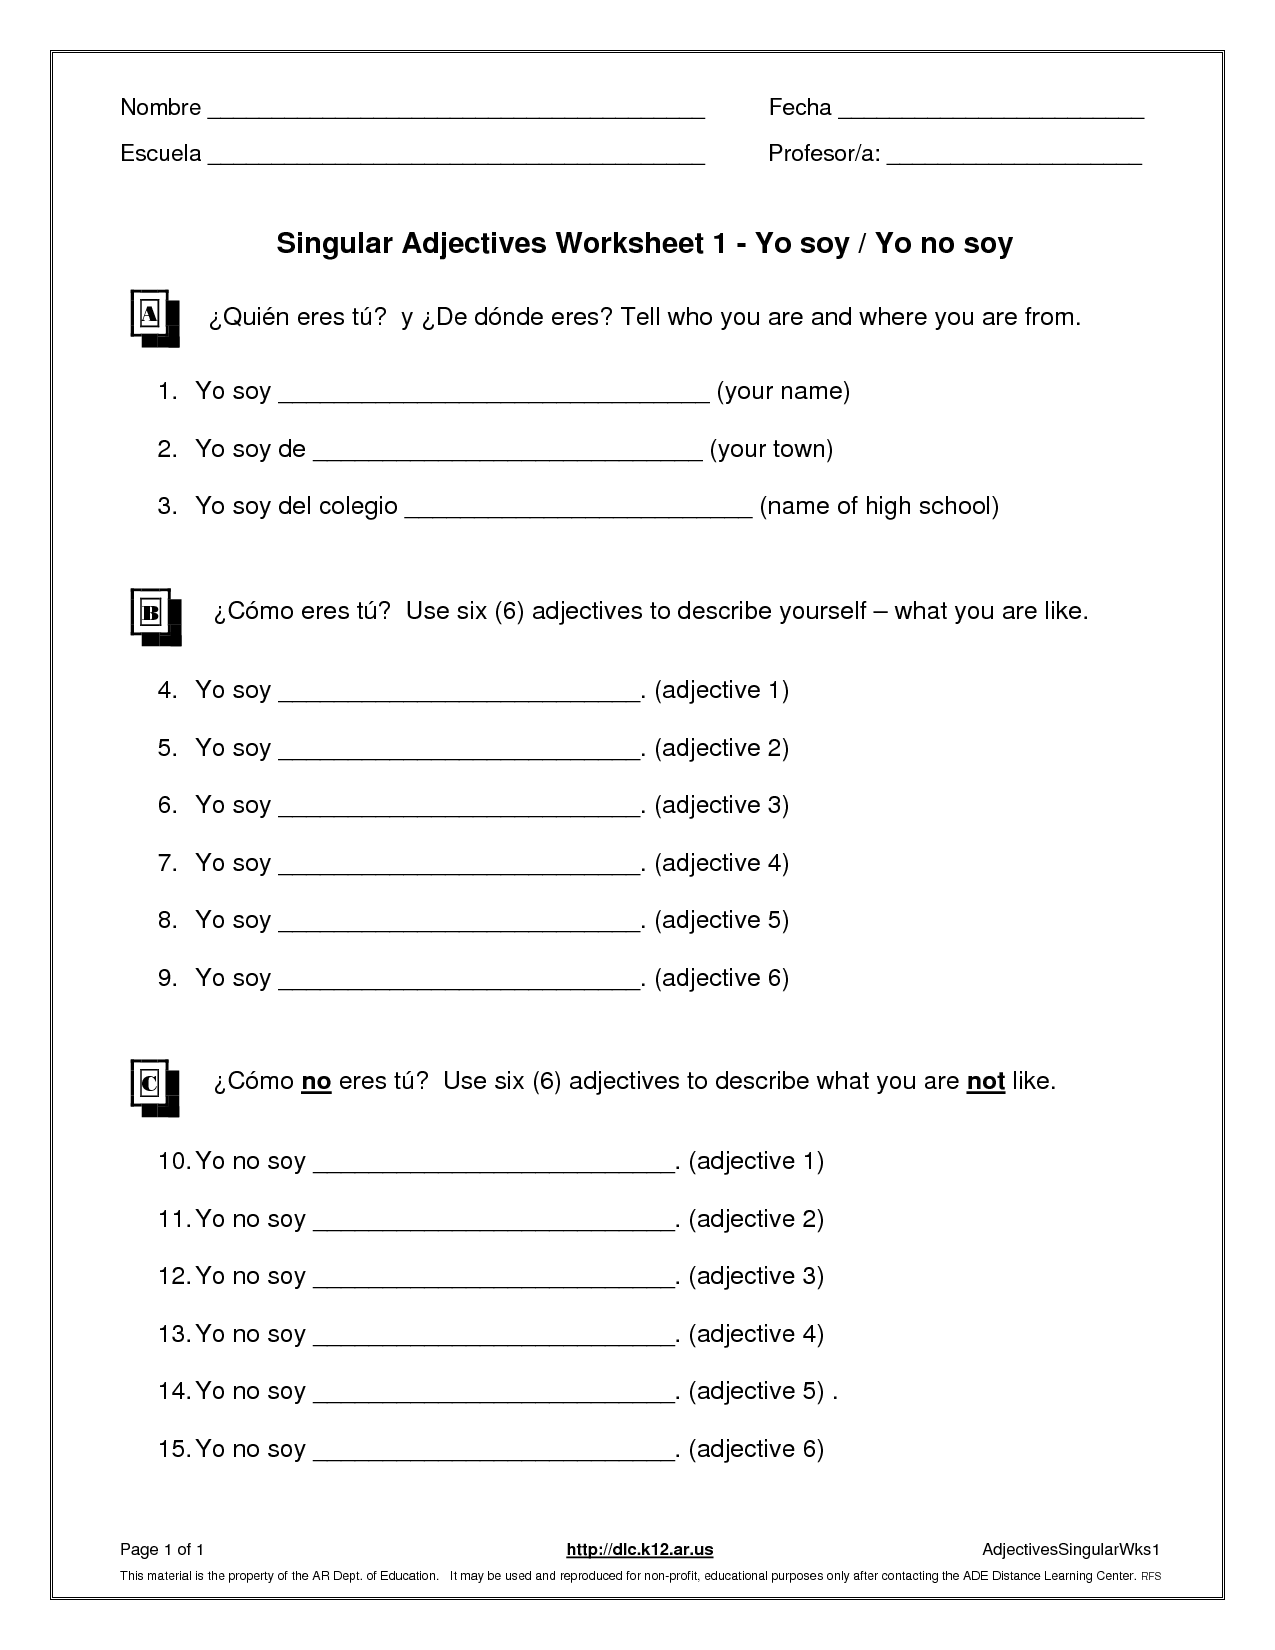 18 Best Images of Anger Management Printable Worksheet  Anger Management Worksheets, Anger 